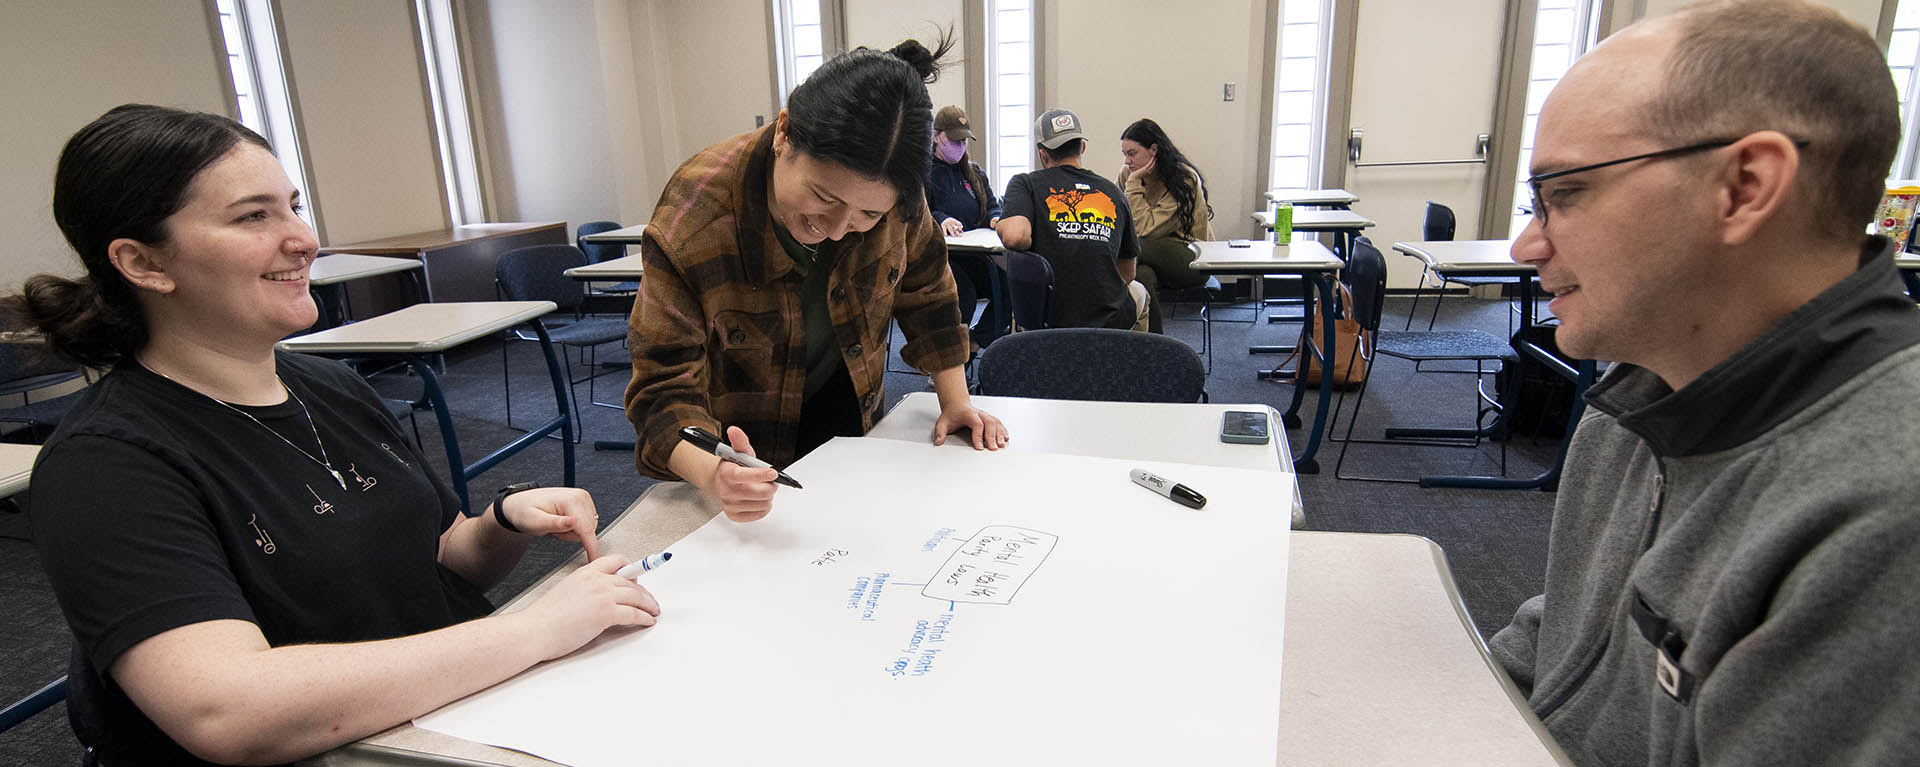 Students work on a poster during a sociology class.